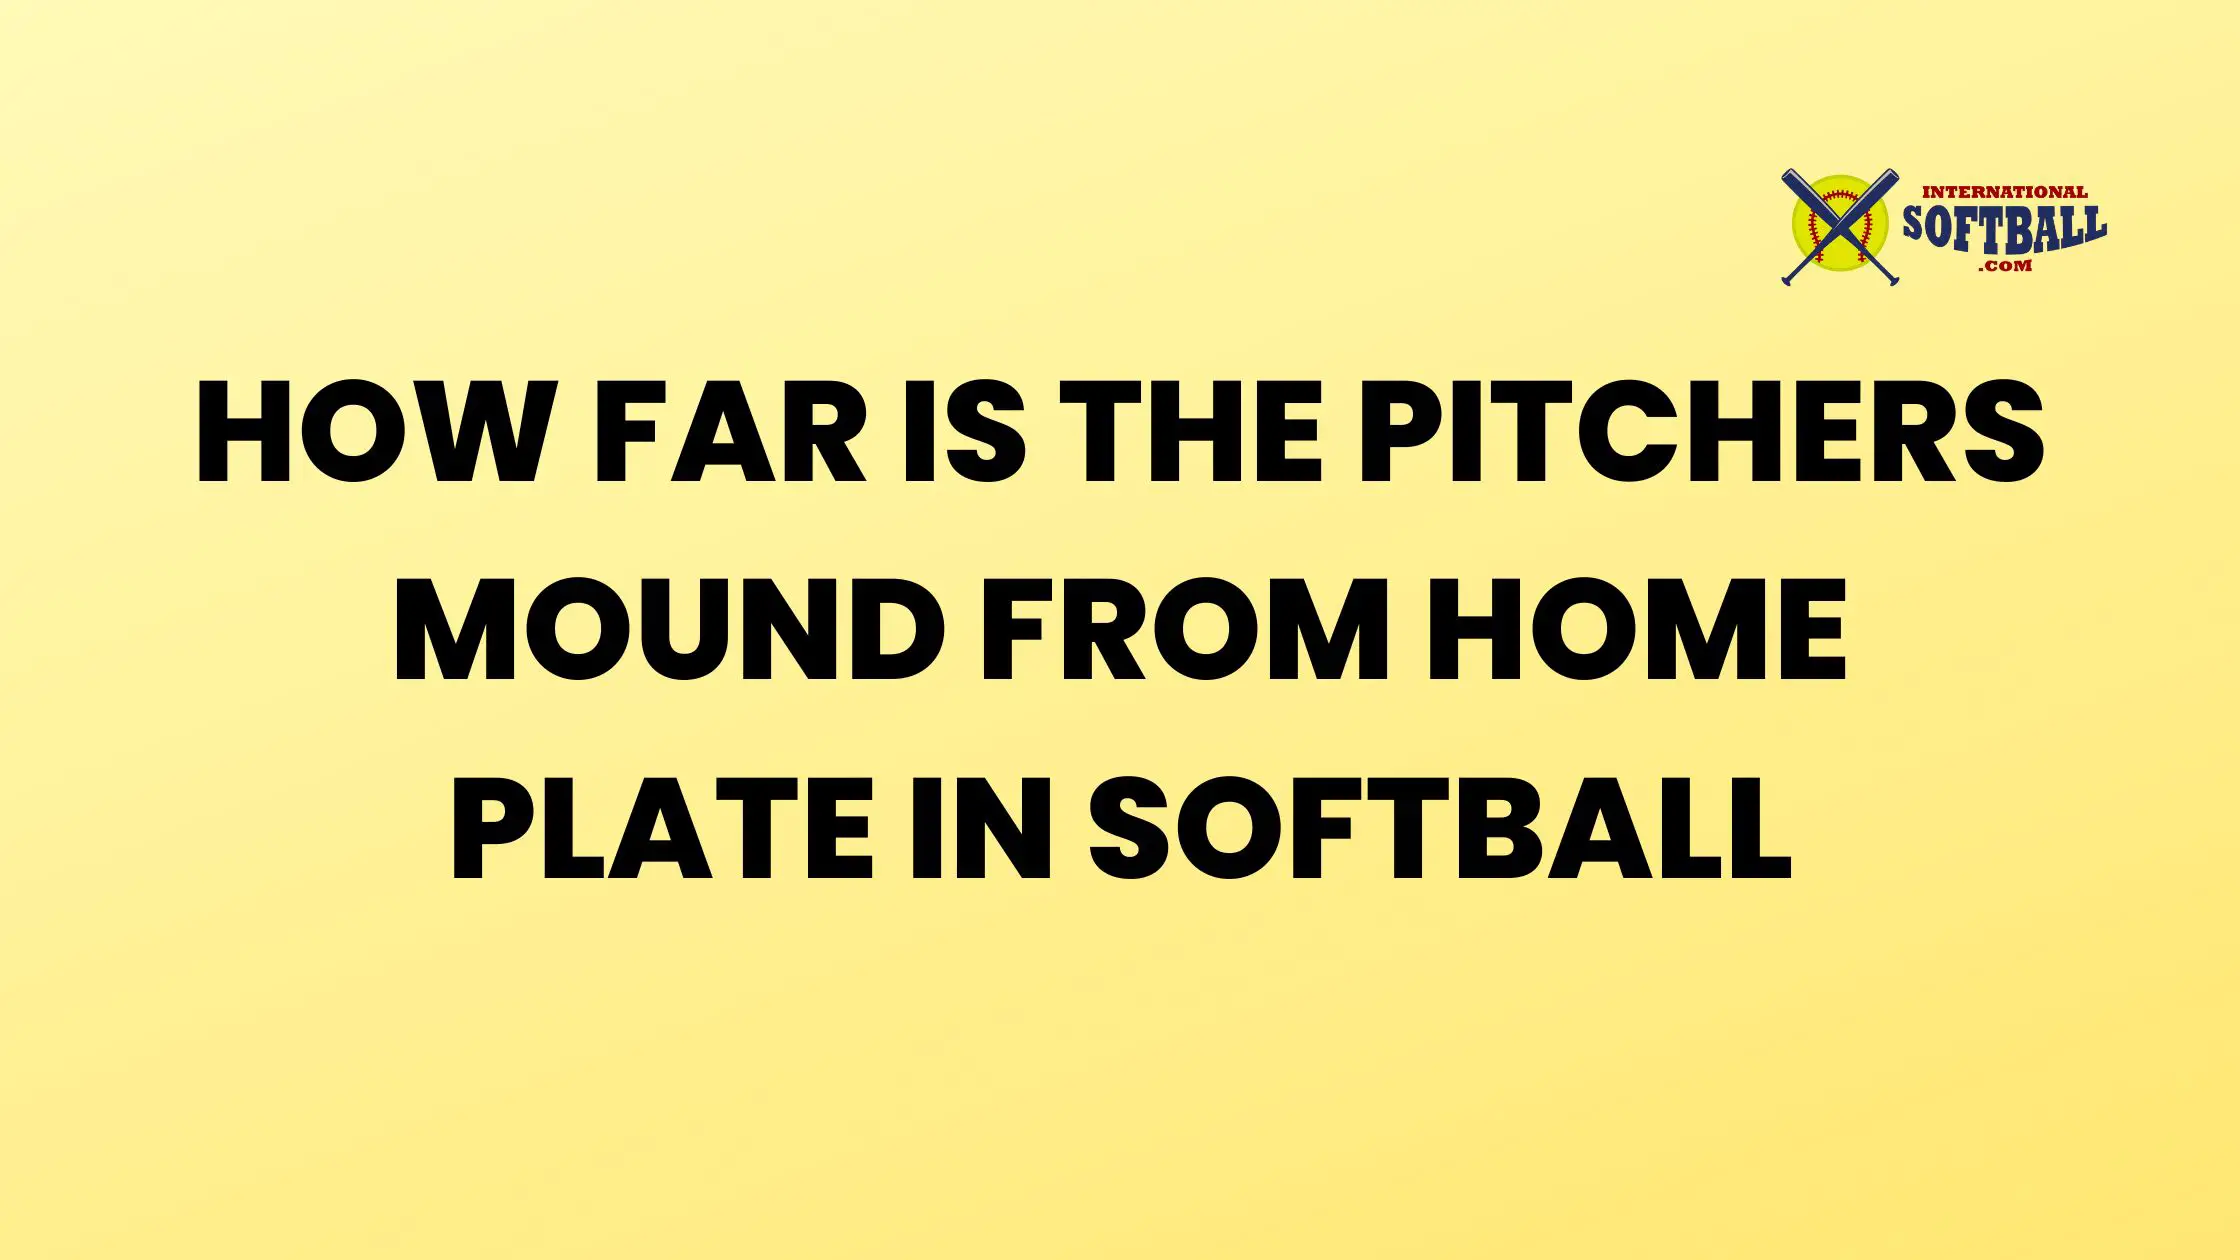 HOW FAR IS PITCHERS MOUND FROM HOME PLATE IN SOFTBALL